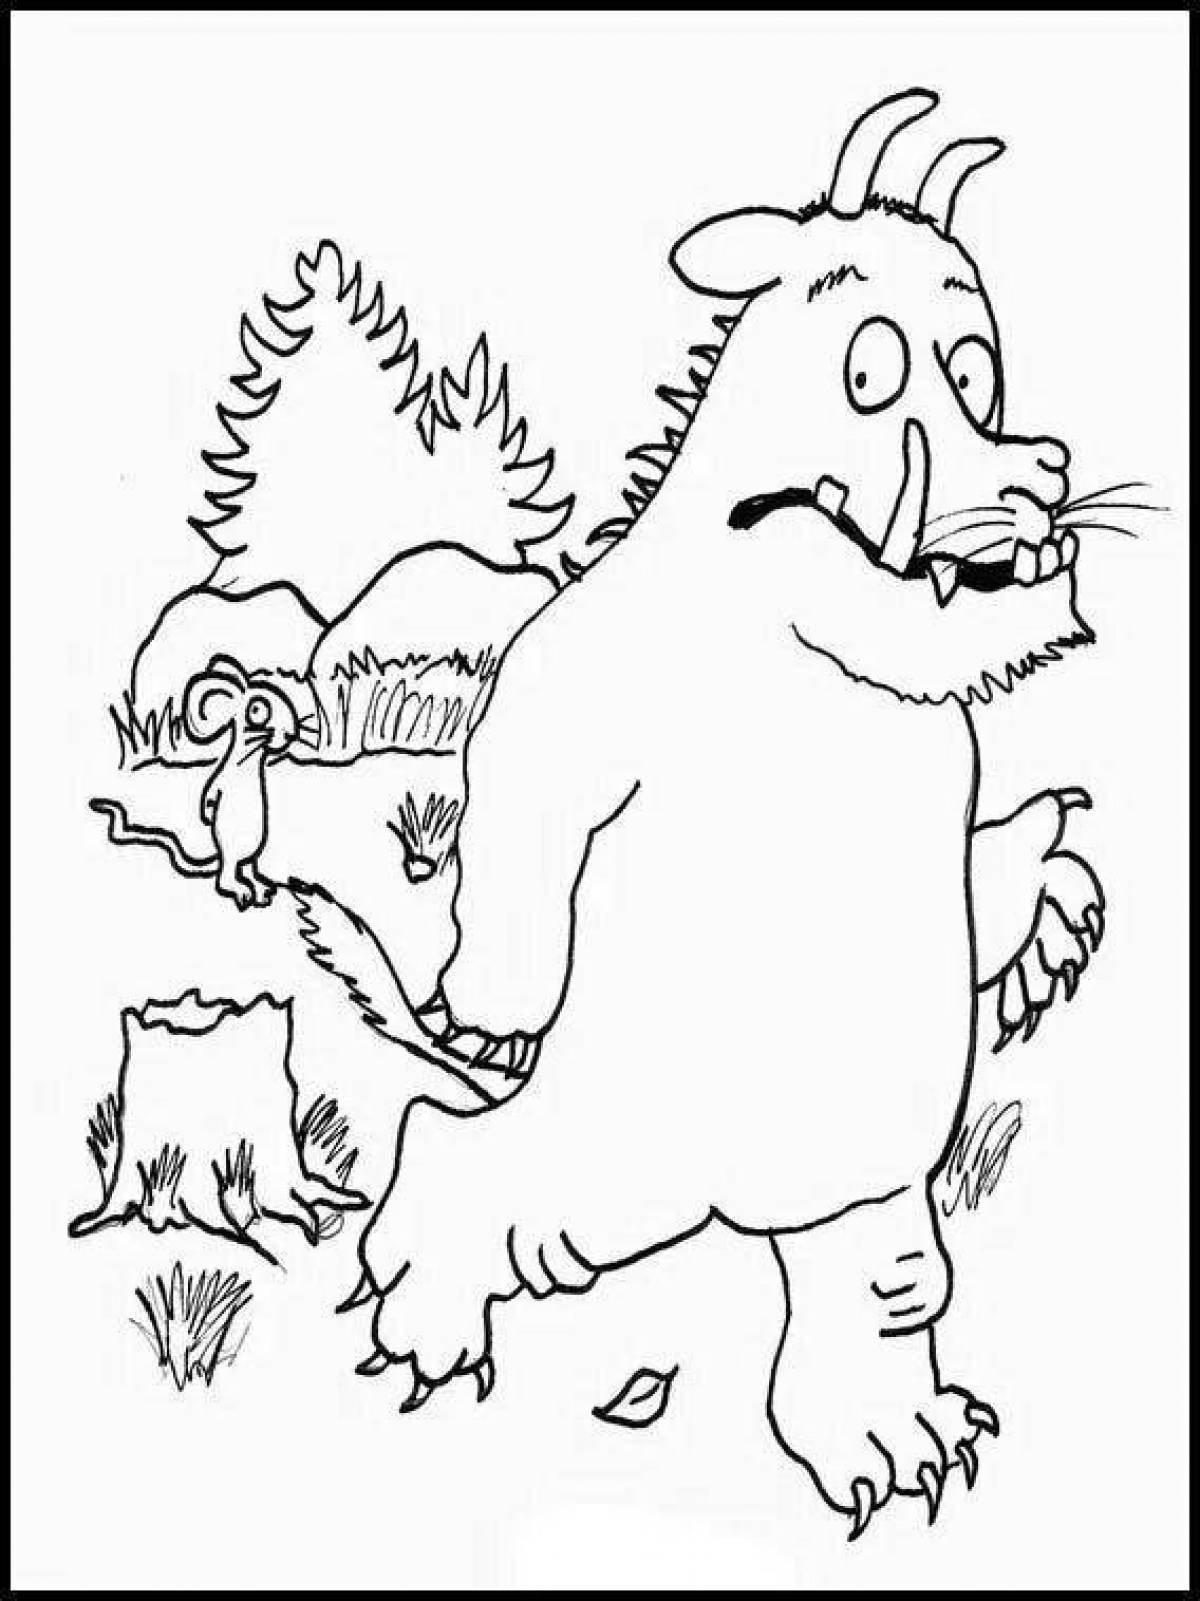 Gruffalo exciting coloring book